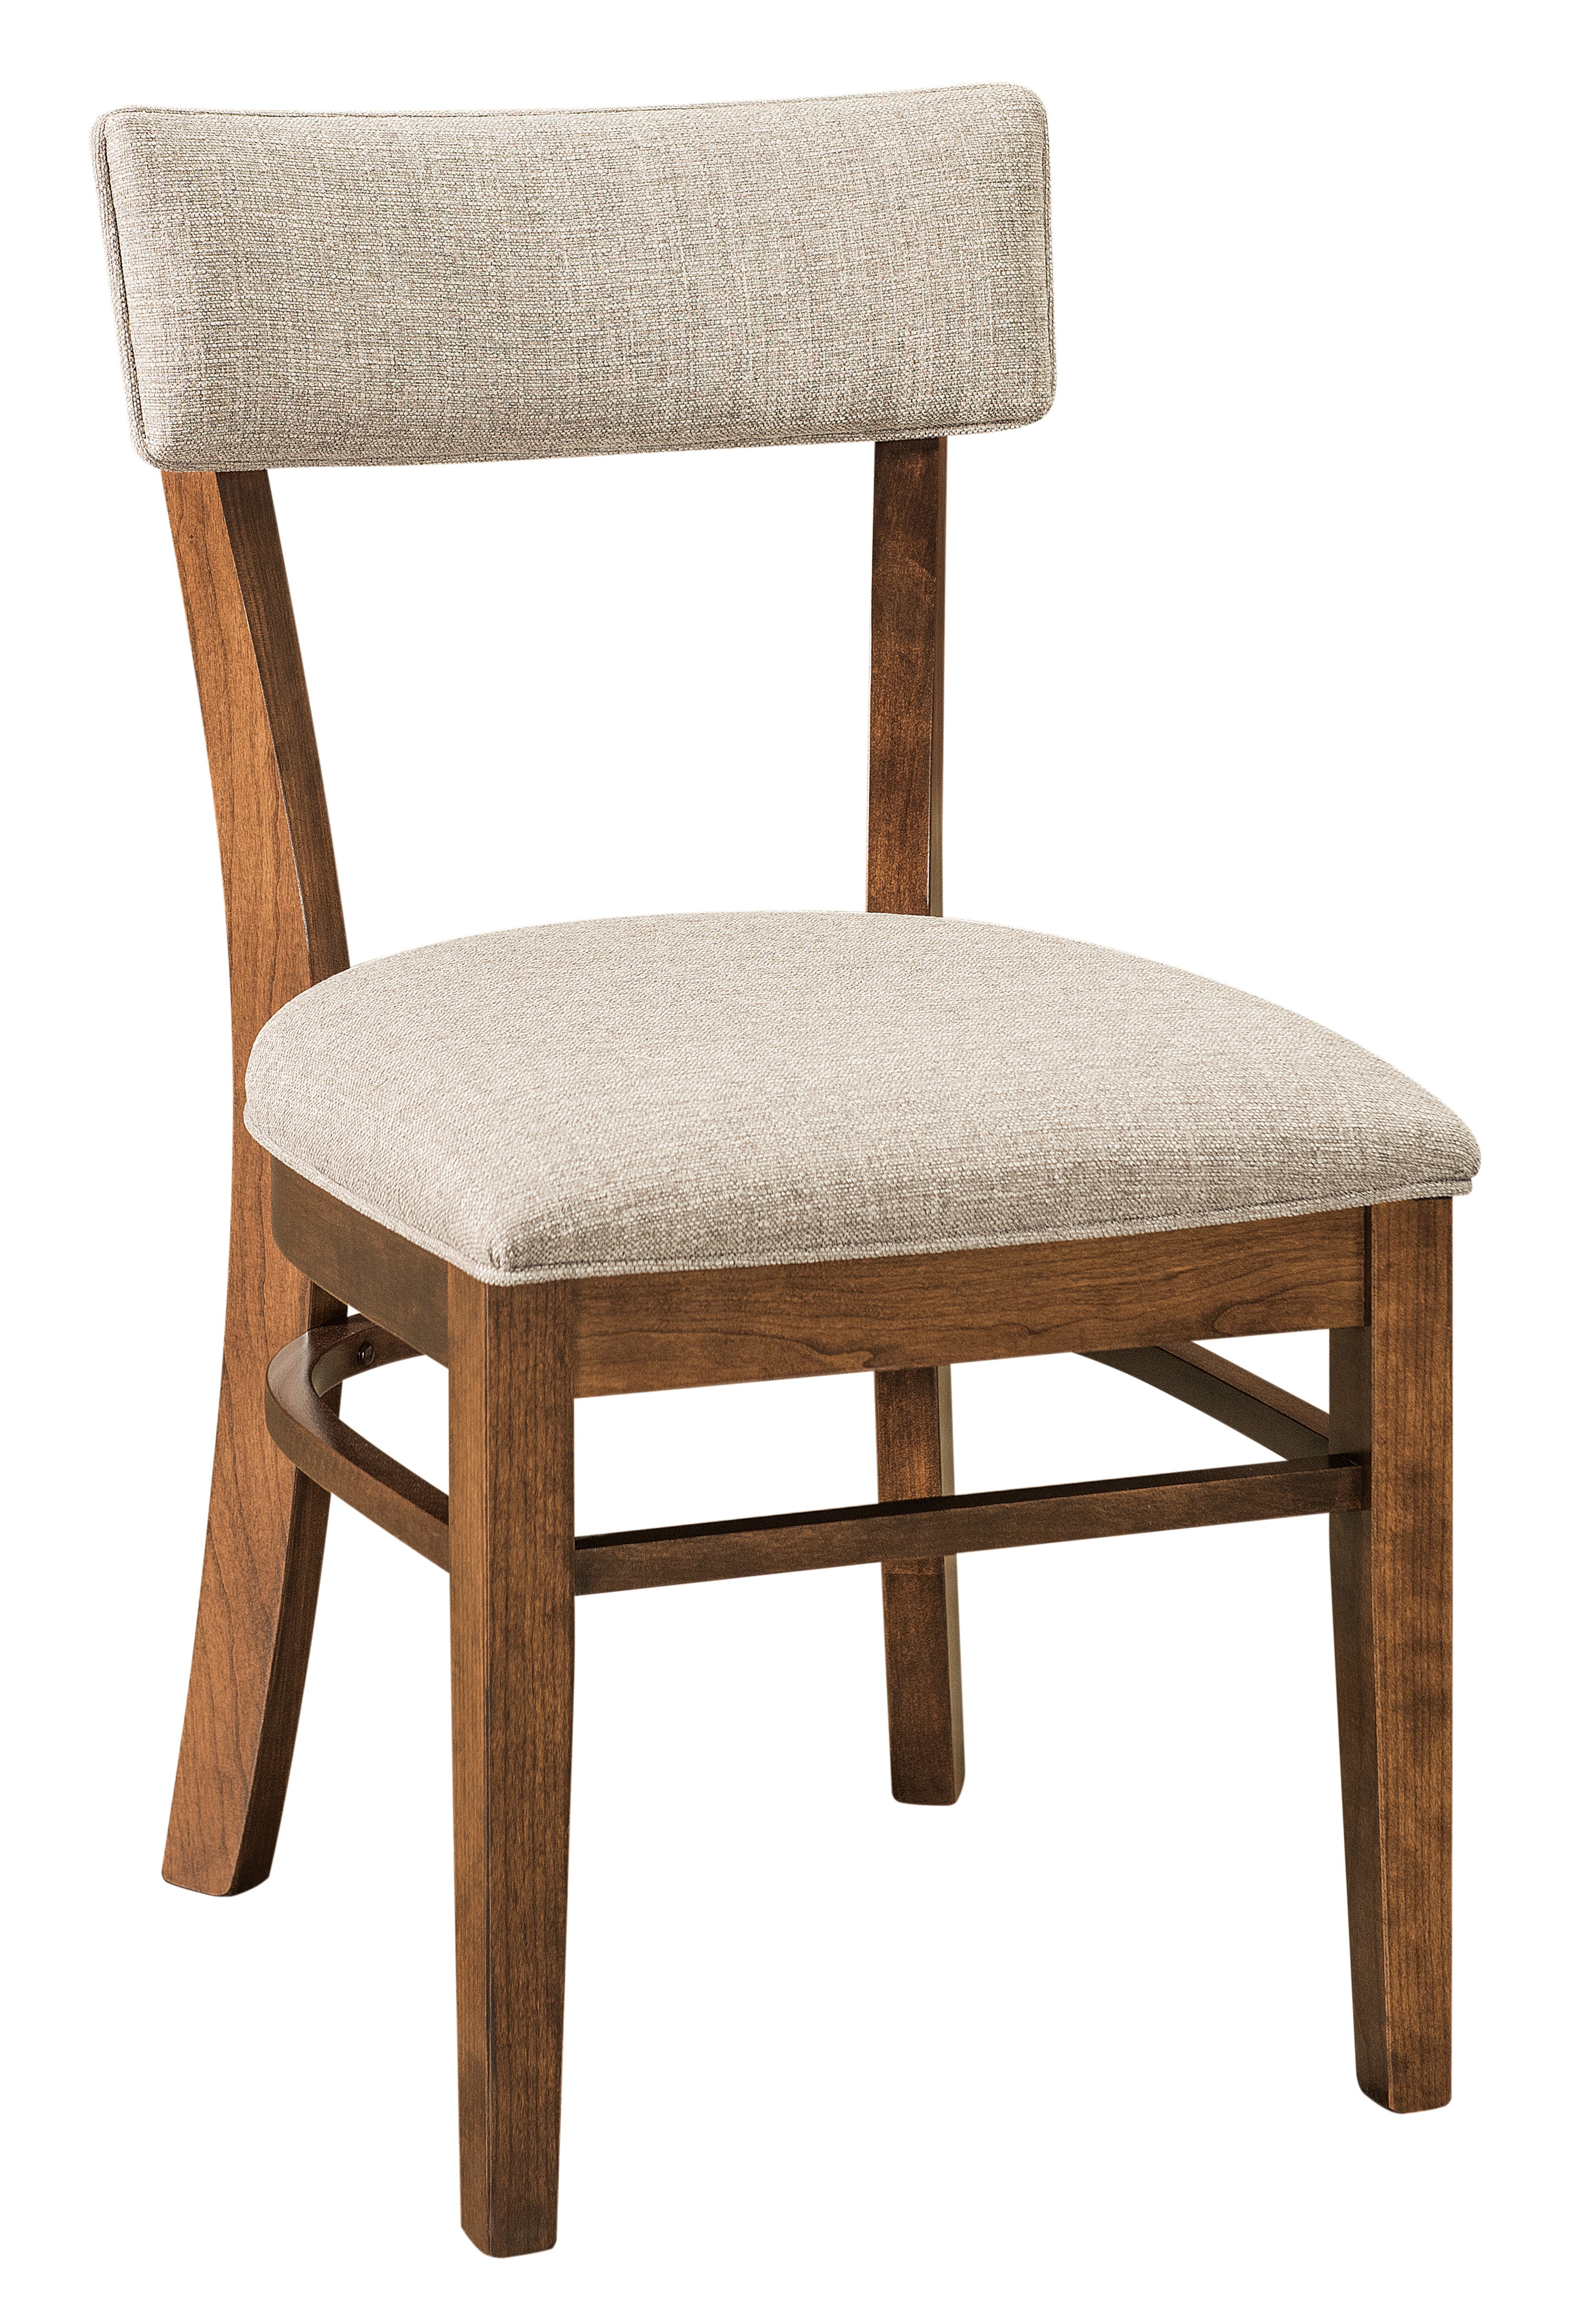 emerson side chair in cherry with earthtone stain and canal fabric